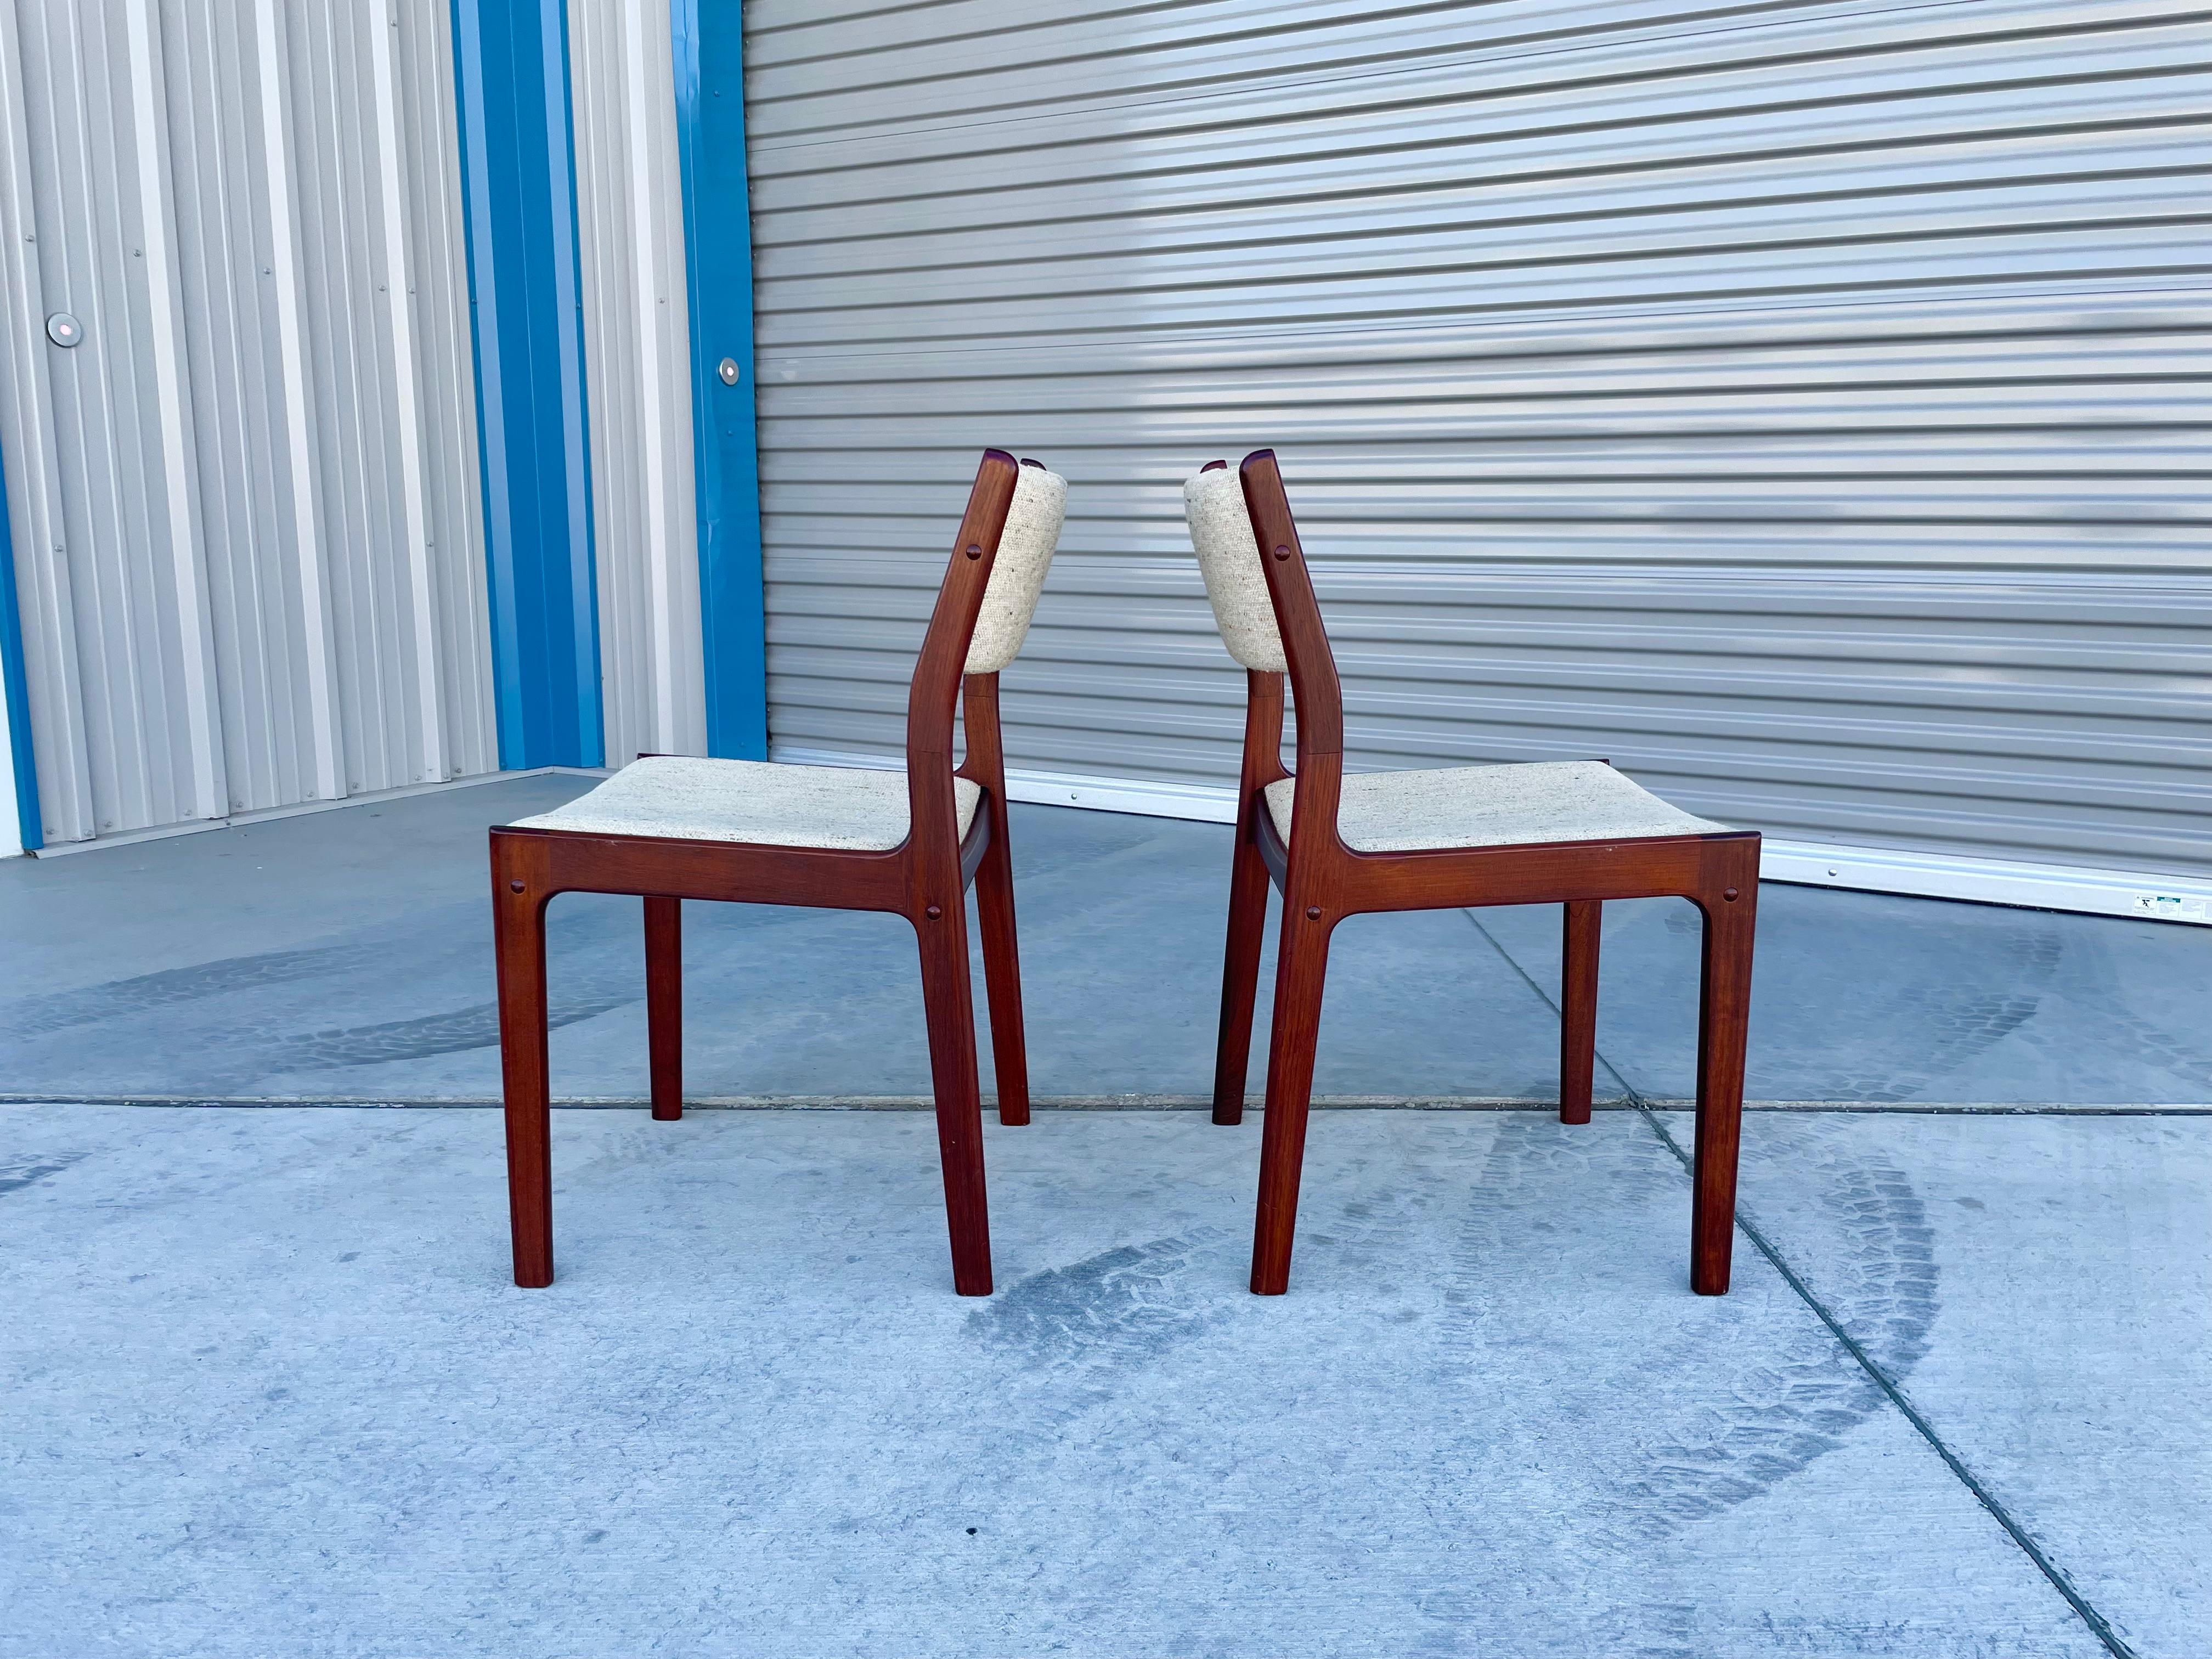 1960s Danish Modern Teak Dining Chairs - Set of 6 For Sale 3